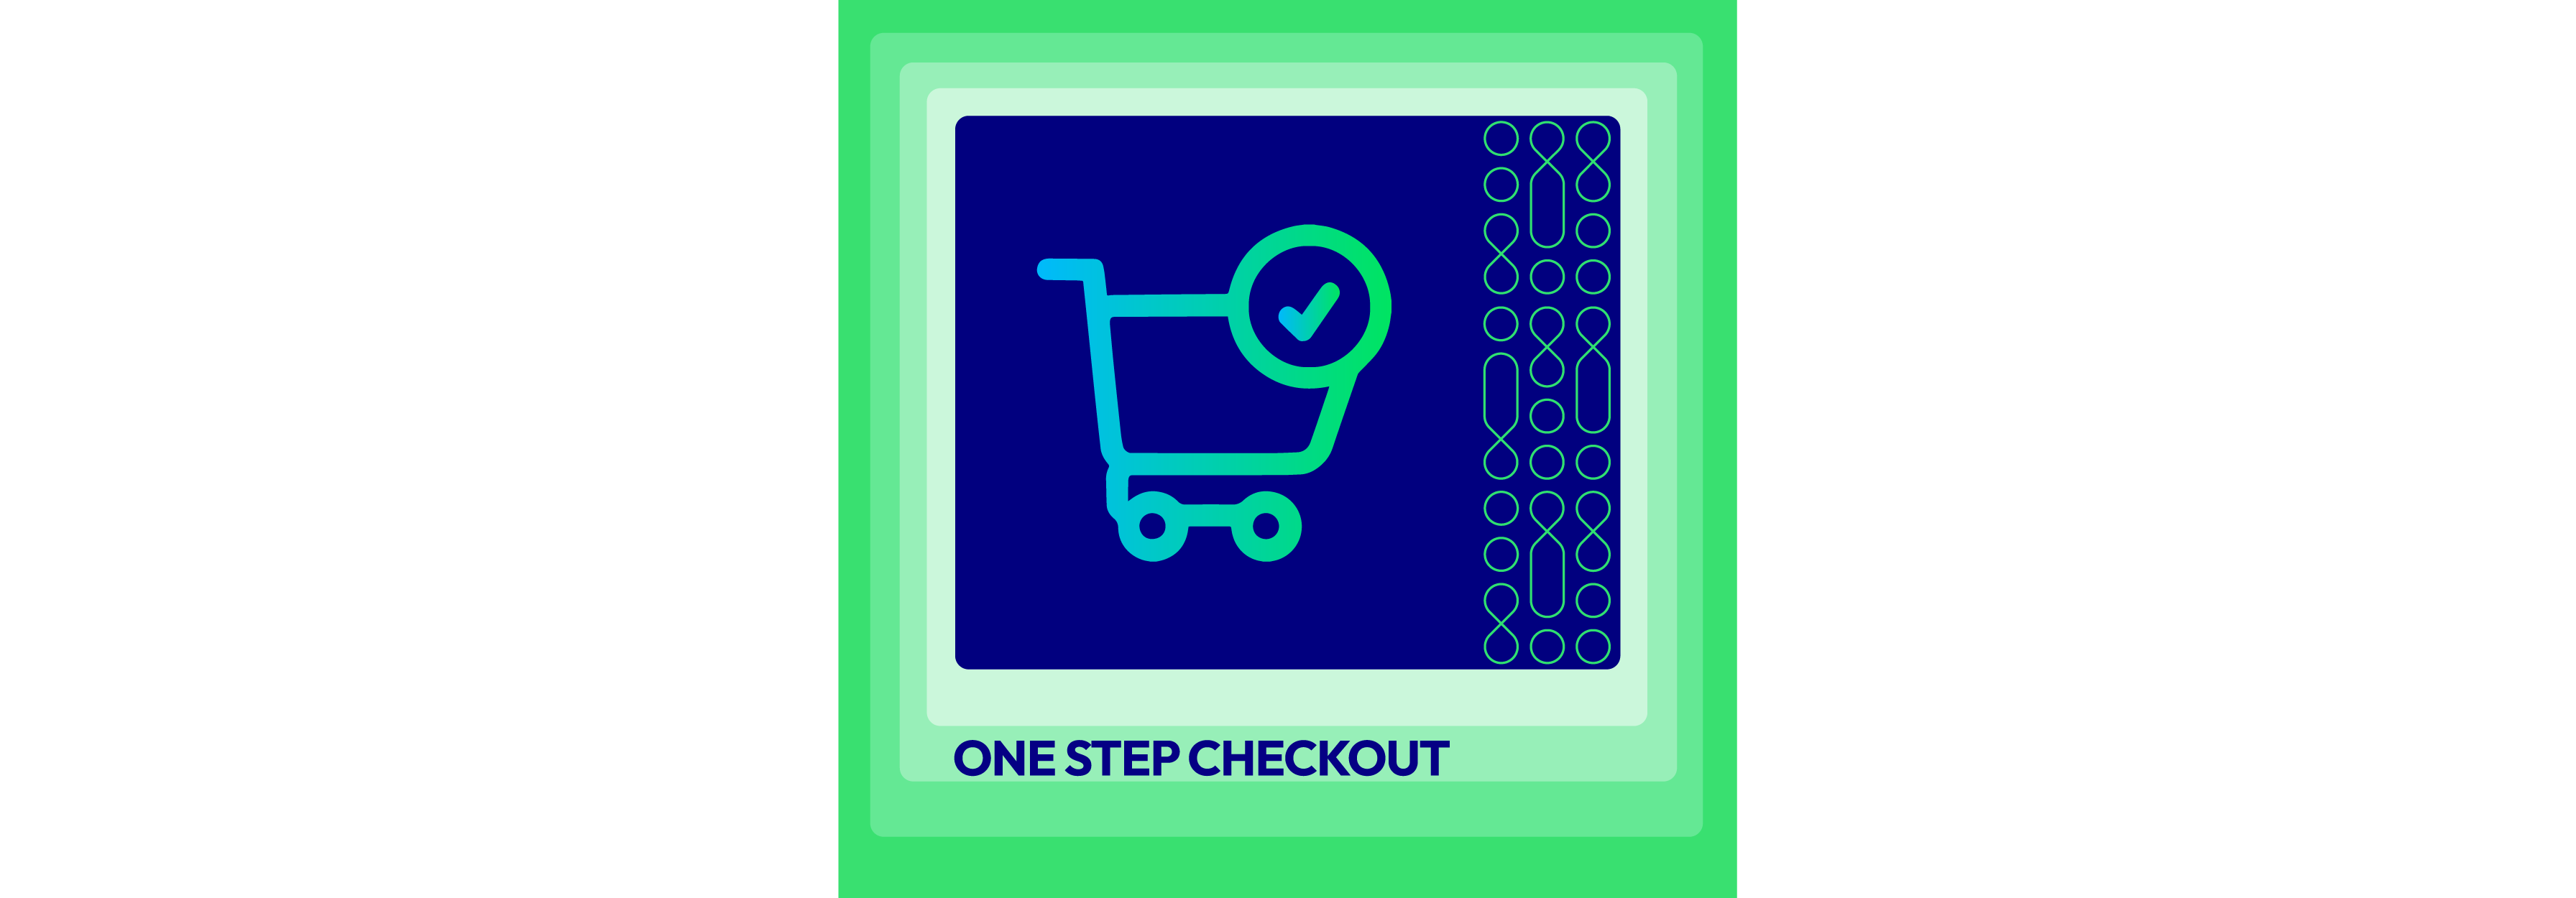 Magento 2 One Step Checkout by mageplaza to reduce cart abandonment